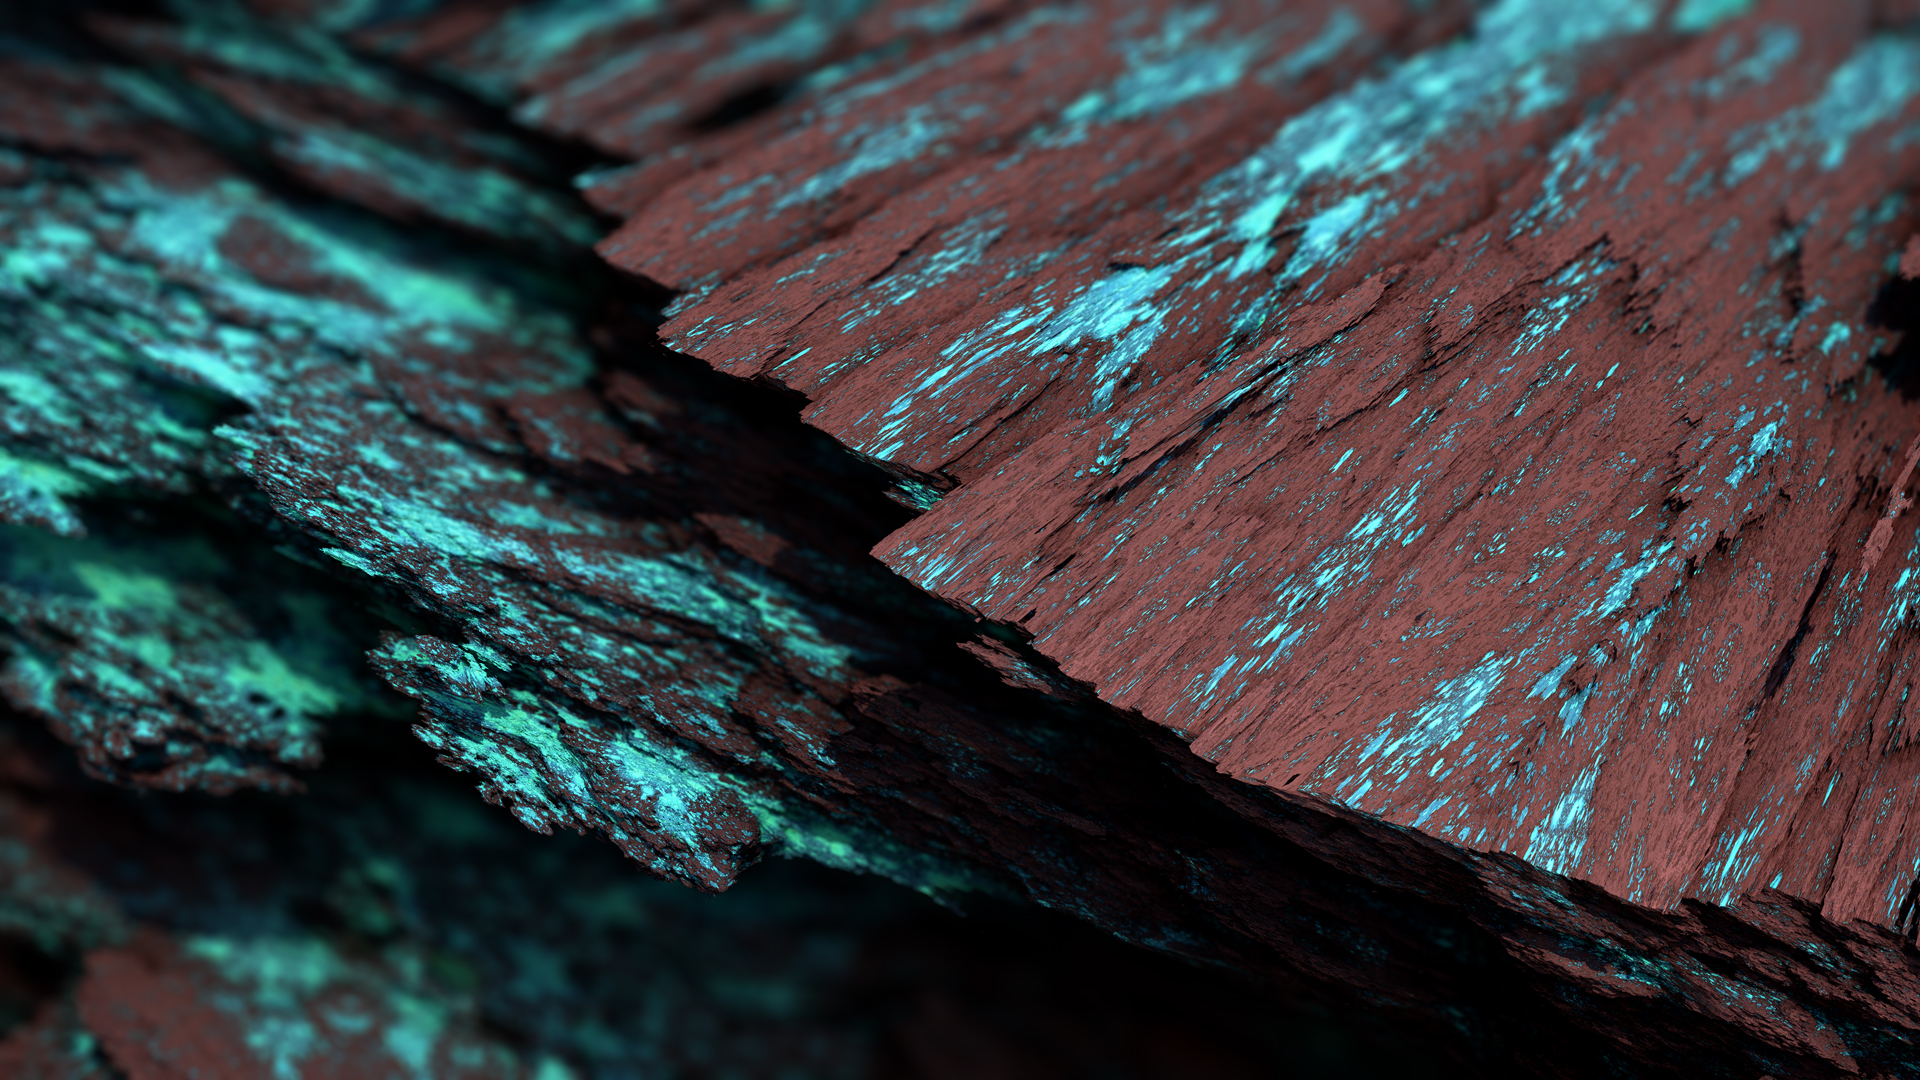 mineral wallpaper,blue,turquoise,wood,water,close up